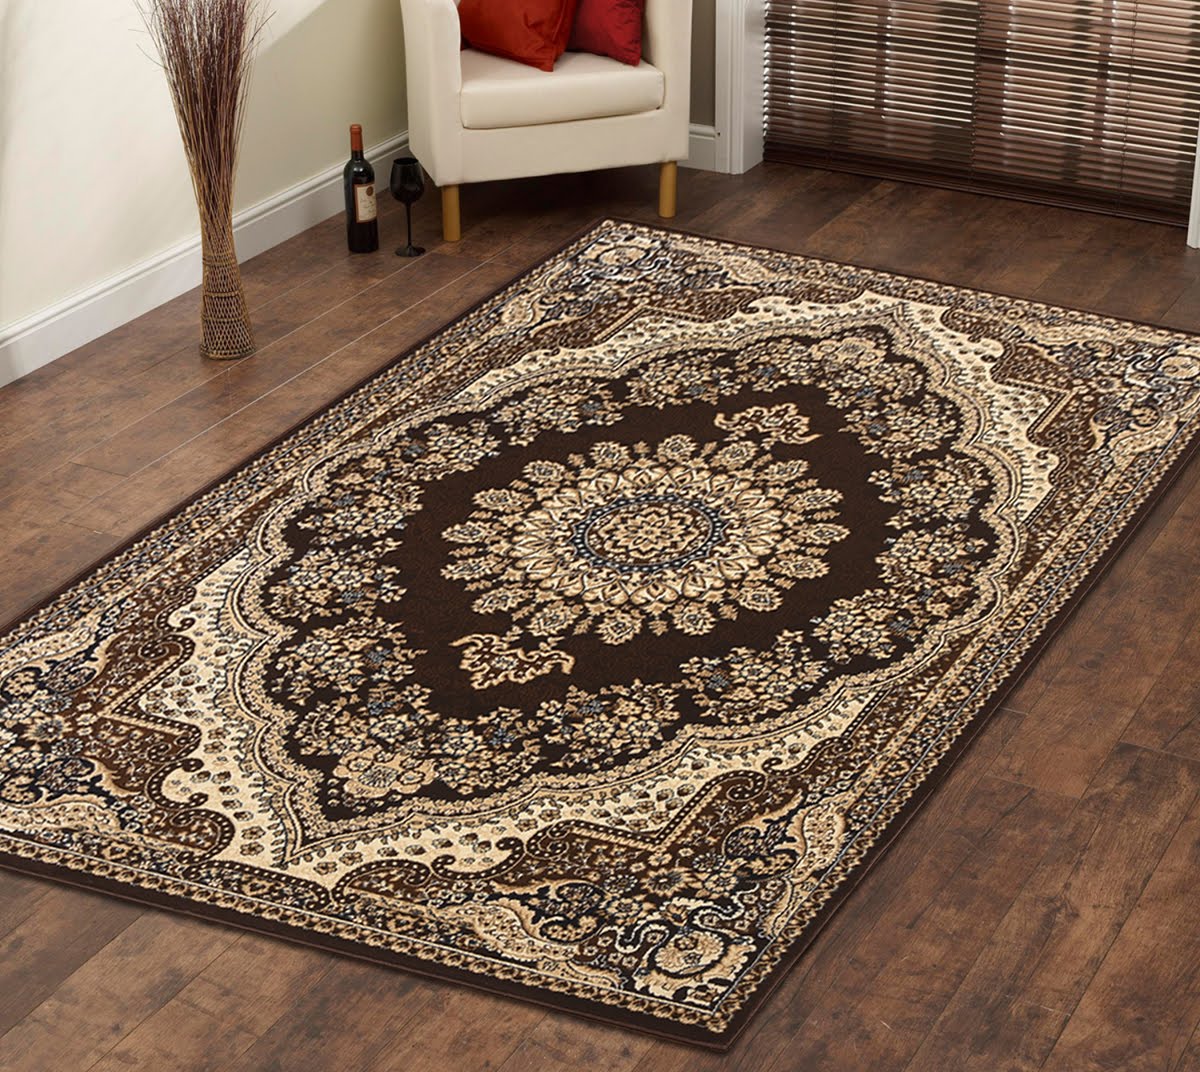 Msrugs Traditional Oriental Medallion, Brown And Beige Area Rugs